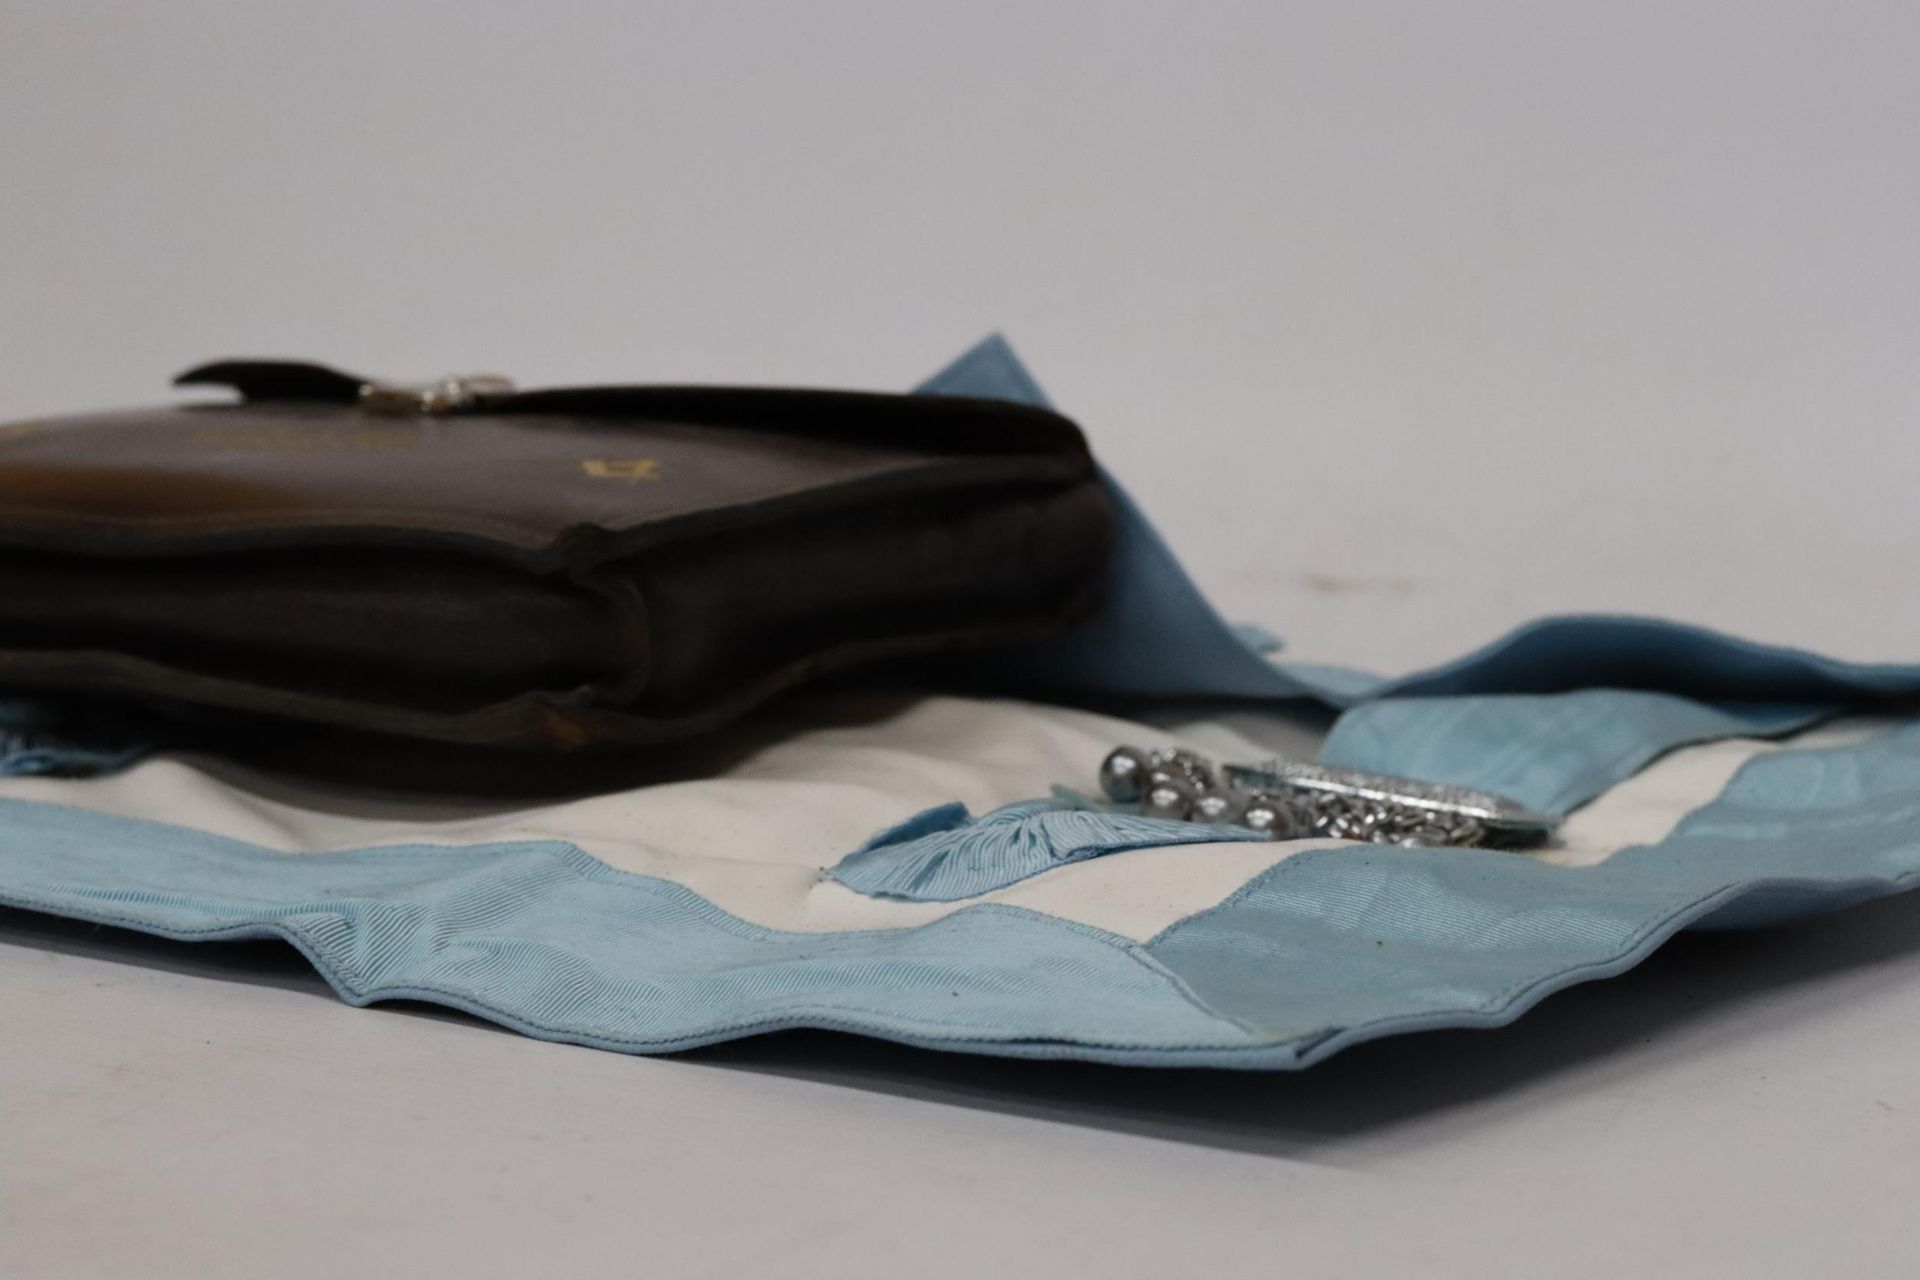 A MASONIMC APRON IN A LEATHER POUCH BELONGED TO BRO. A. DALE, GOULBURN LODGE, NO. 8478 - Image 5 of 5